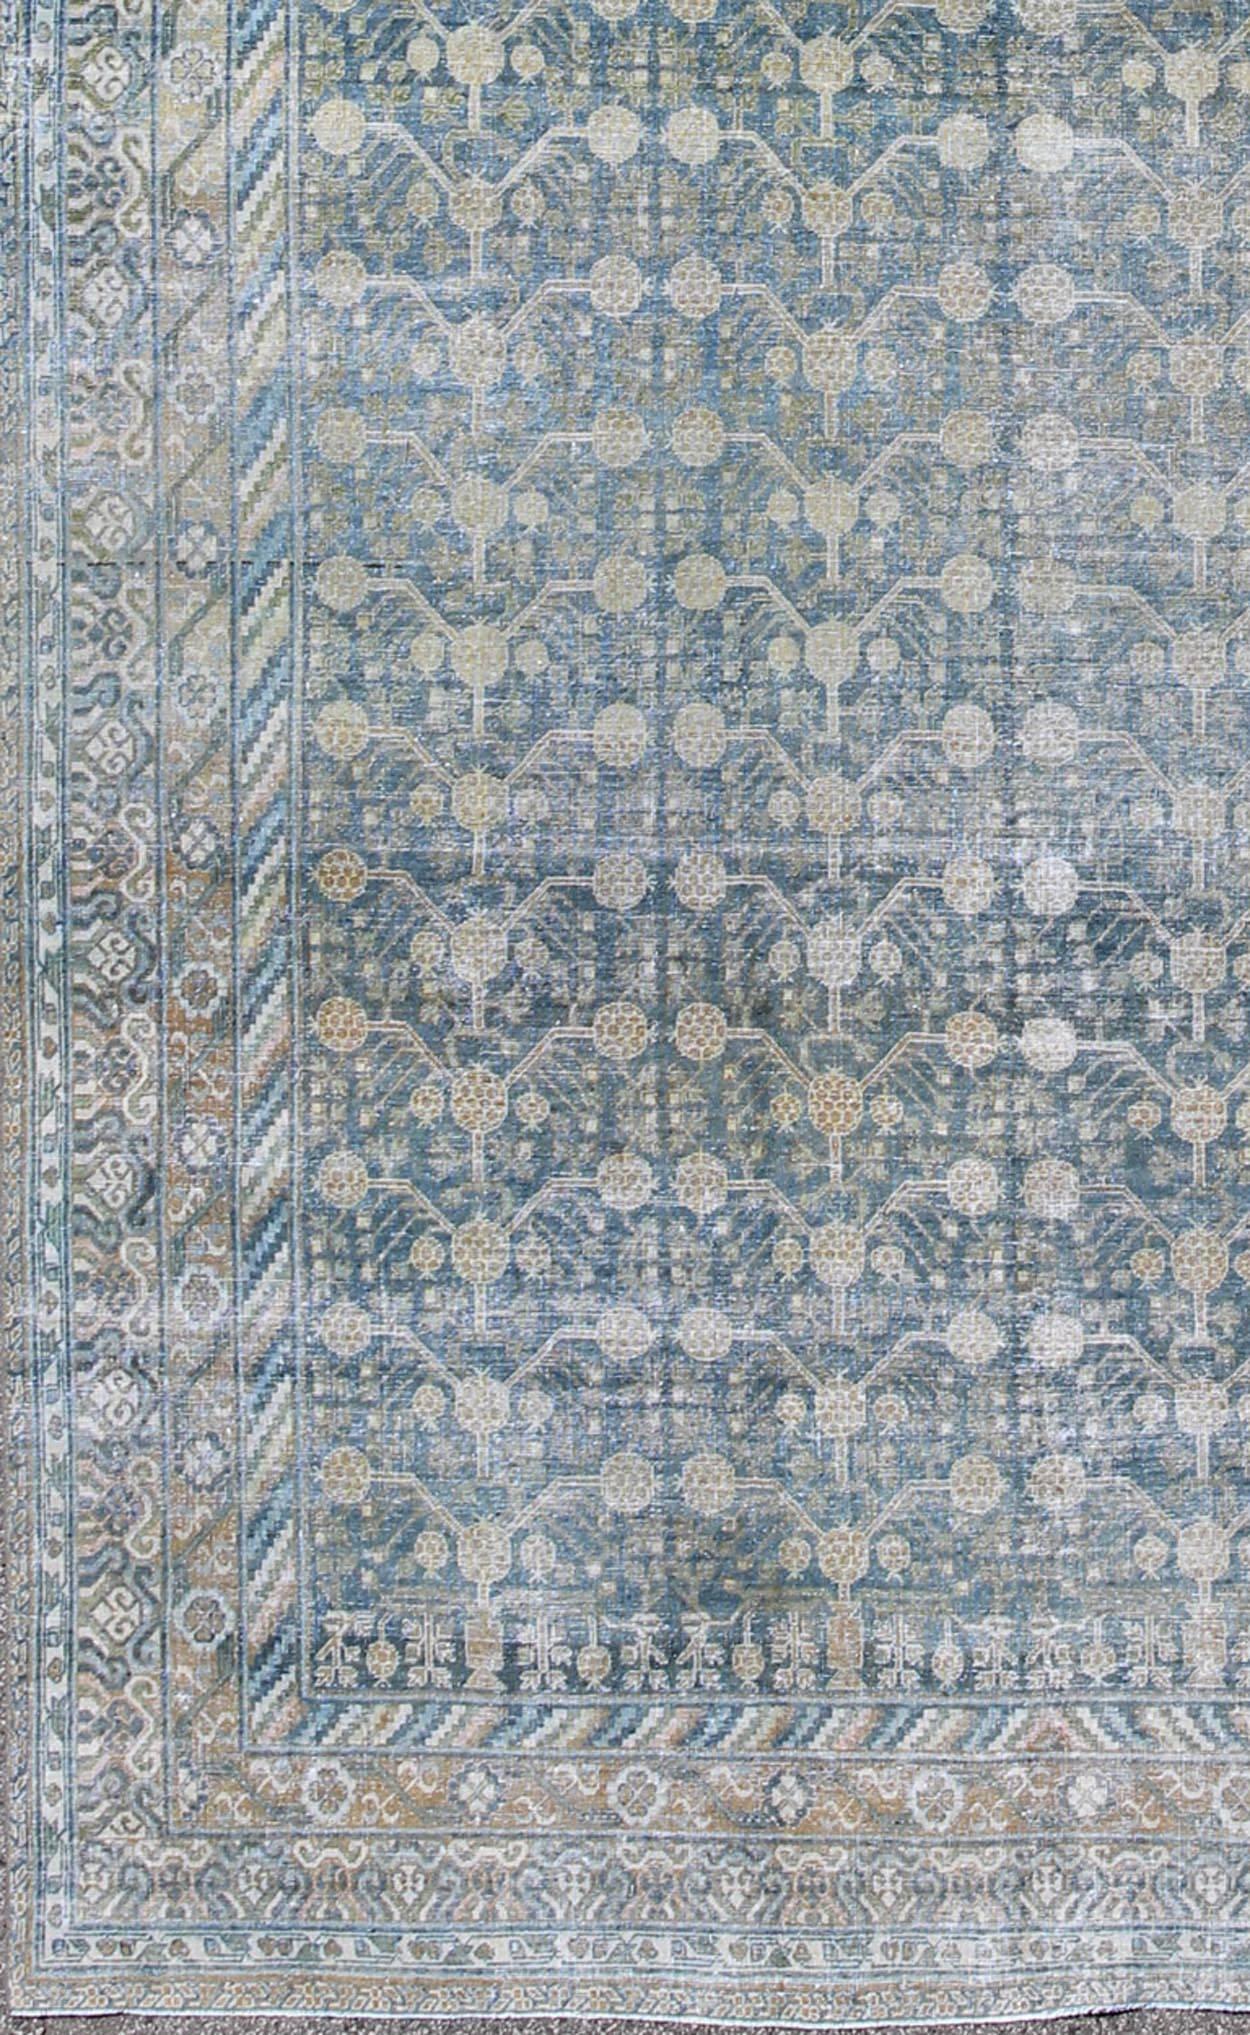 Antique Khotan rug with blue all-over design of blossoms and flowers, large Khotan from Turkestan rug sus-1803-387, country of origin / type: Turkestan / Khotan, circa 1910

This attractive antique Khotan rug (circa 1910) is a spectacular